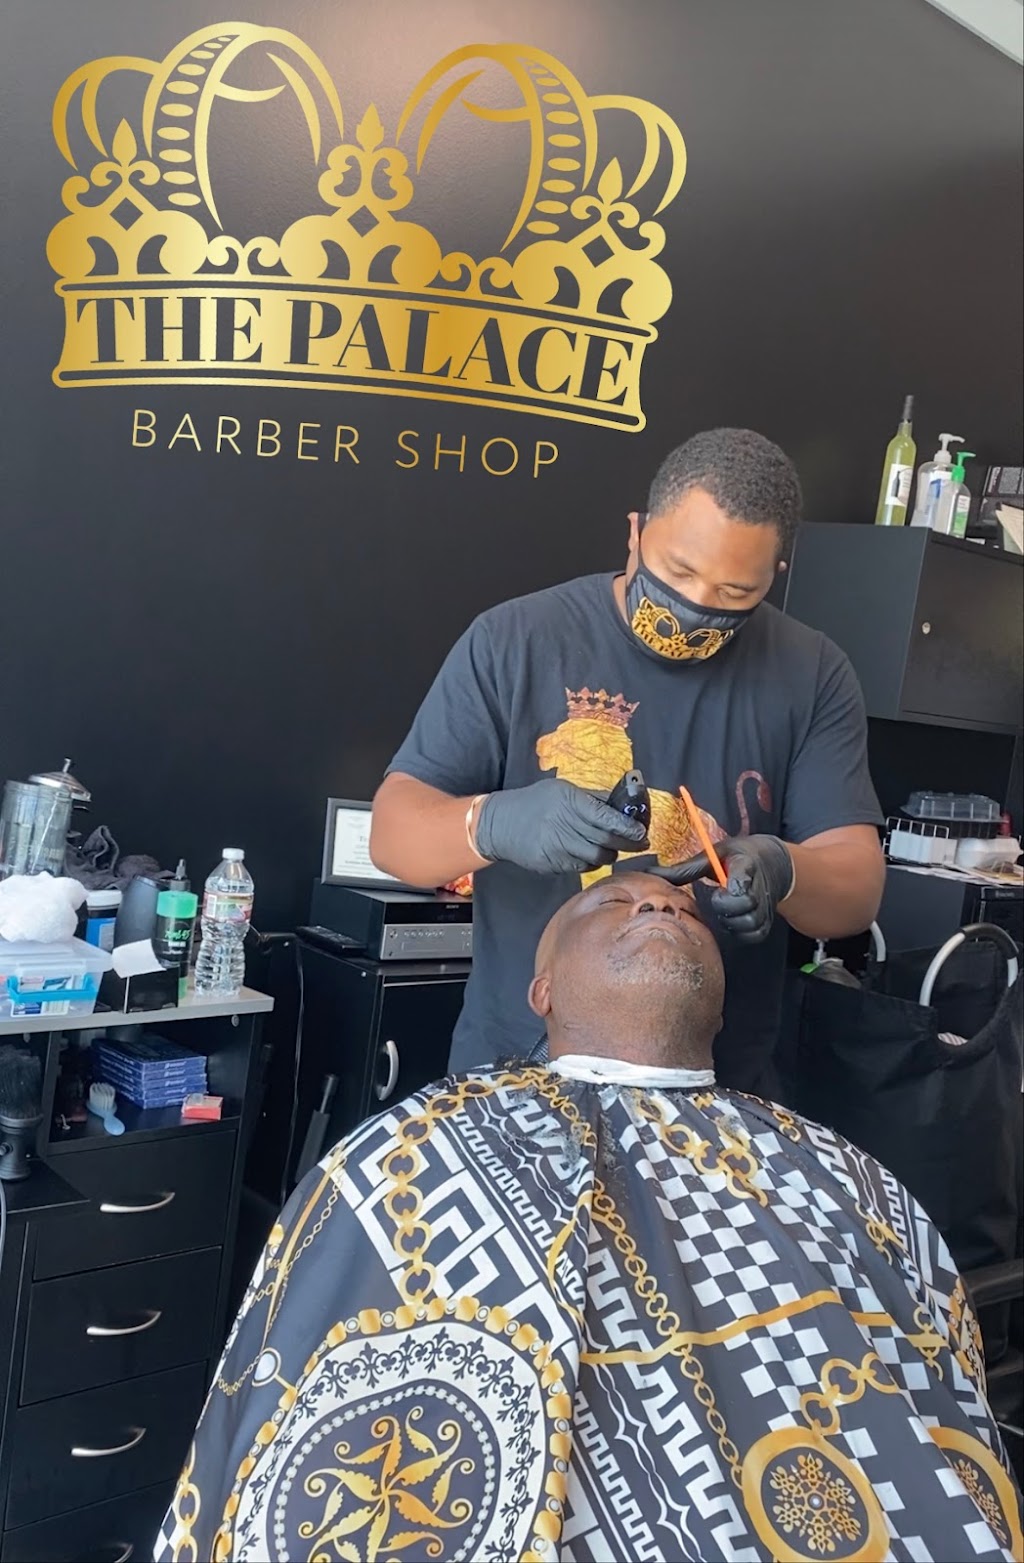 The Palace Barber Shop | Photo 2 of 4 | Address: 3141 E Broad St Ste 303 Studio 105, Mansfield, TX 76063, USA | Phone: (469) 260-5333